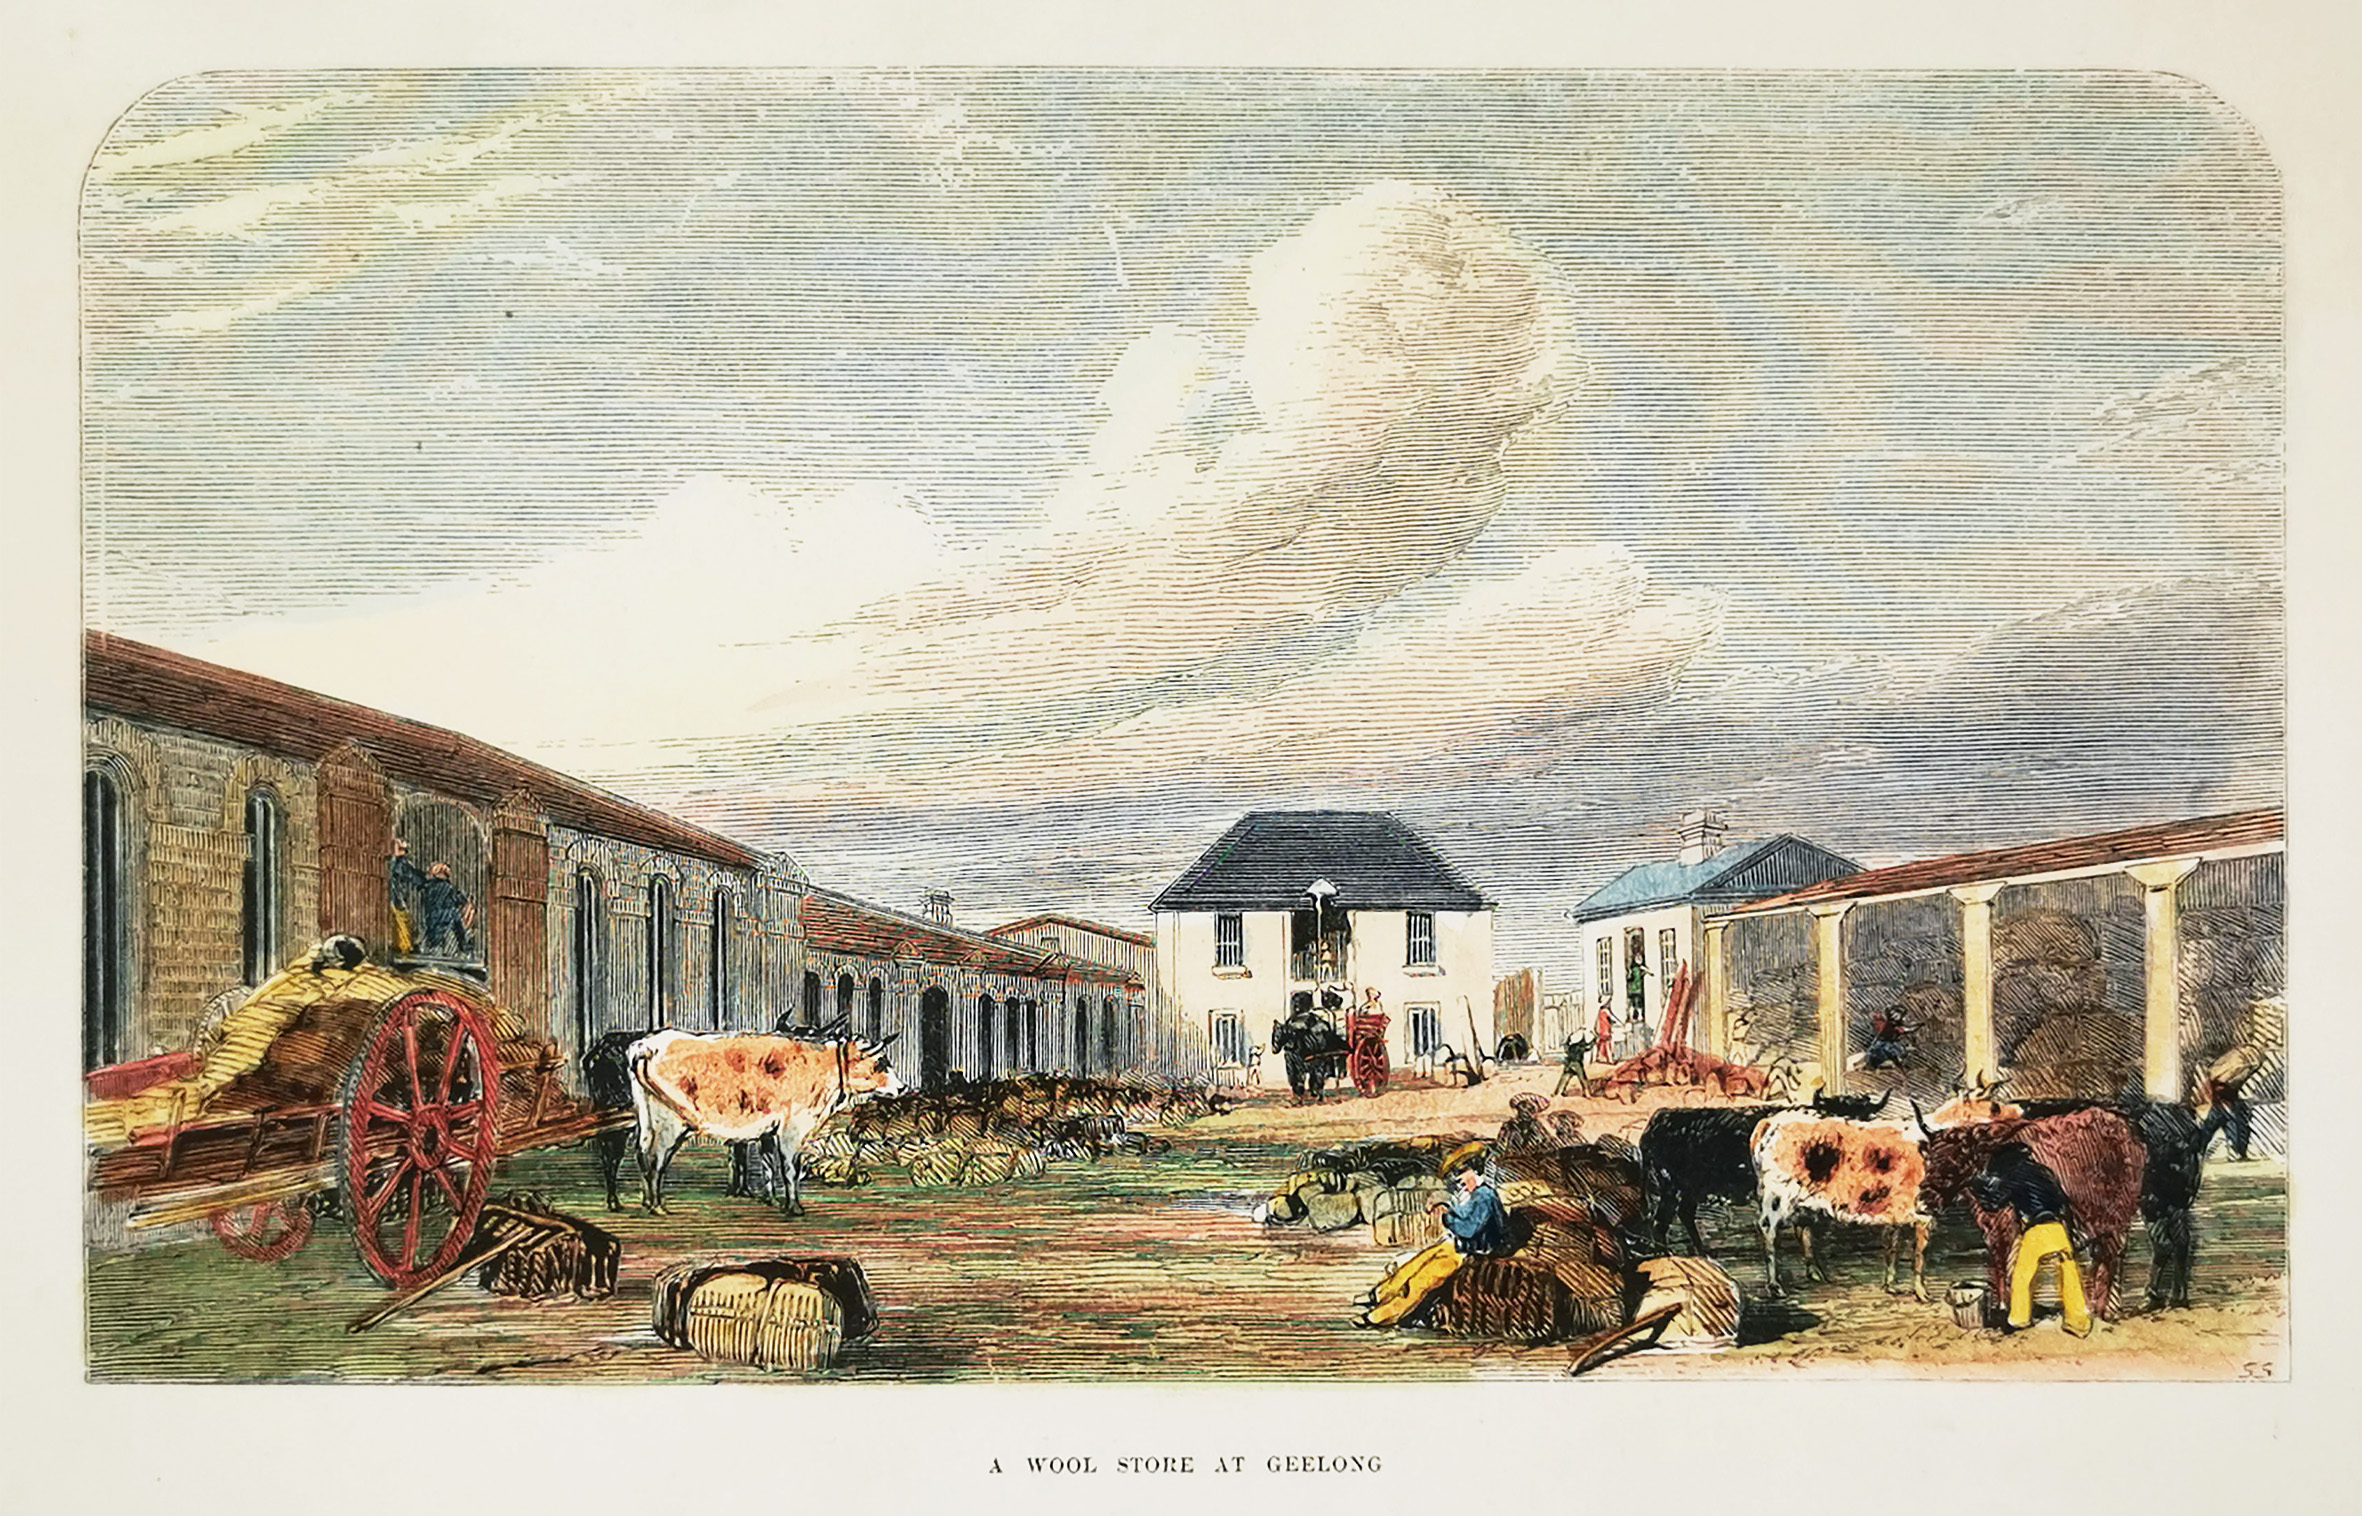 A Wool Store at Geelong - Antique Print from 1854